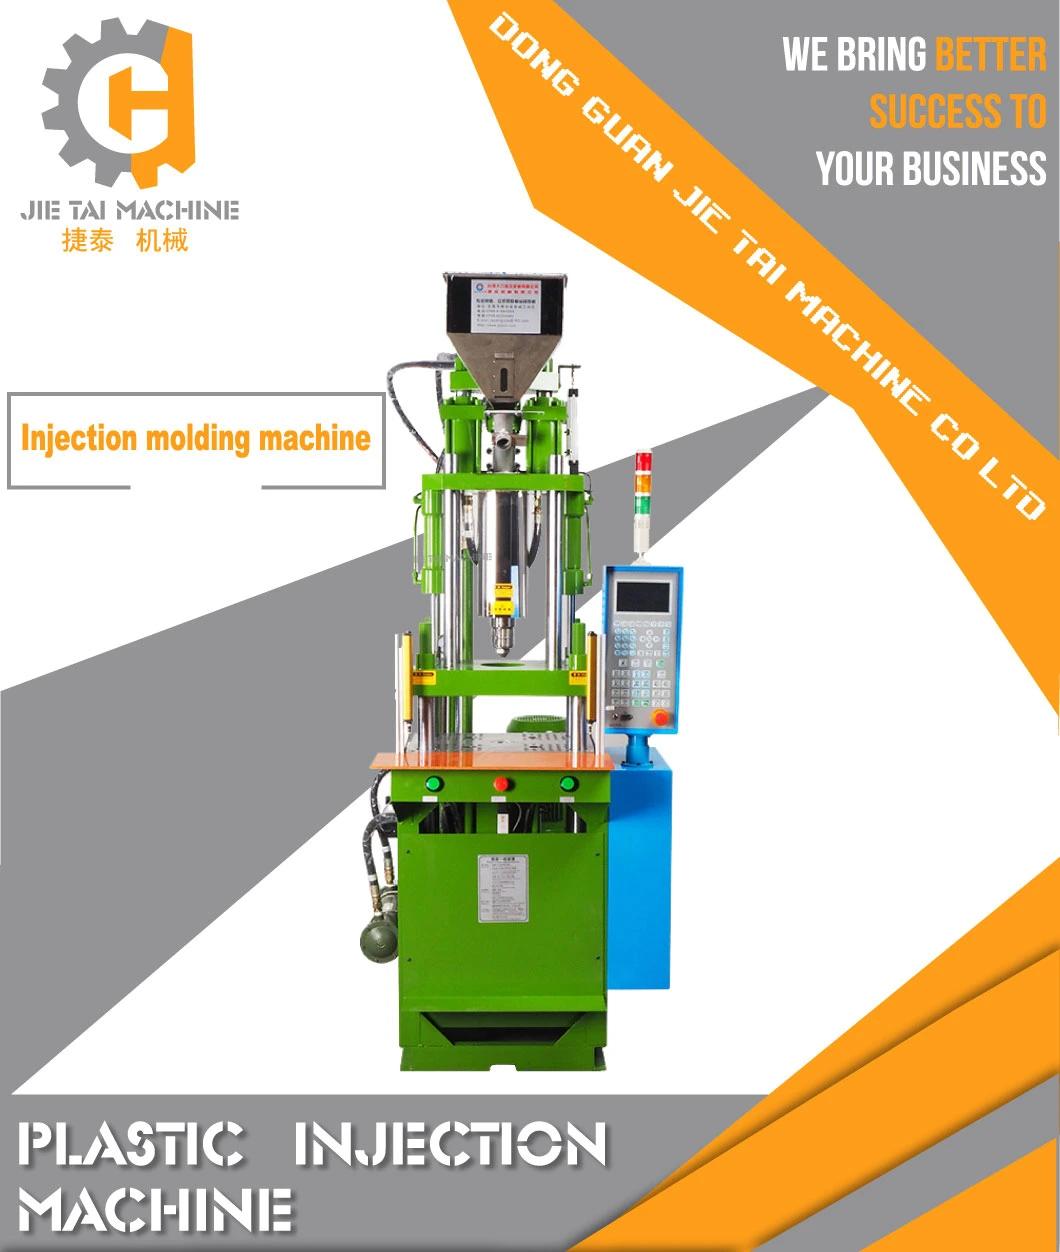 High Efficiency 20t Plastic Injection Molding Machine to Win Warm Praise From Customers